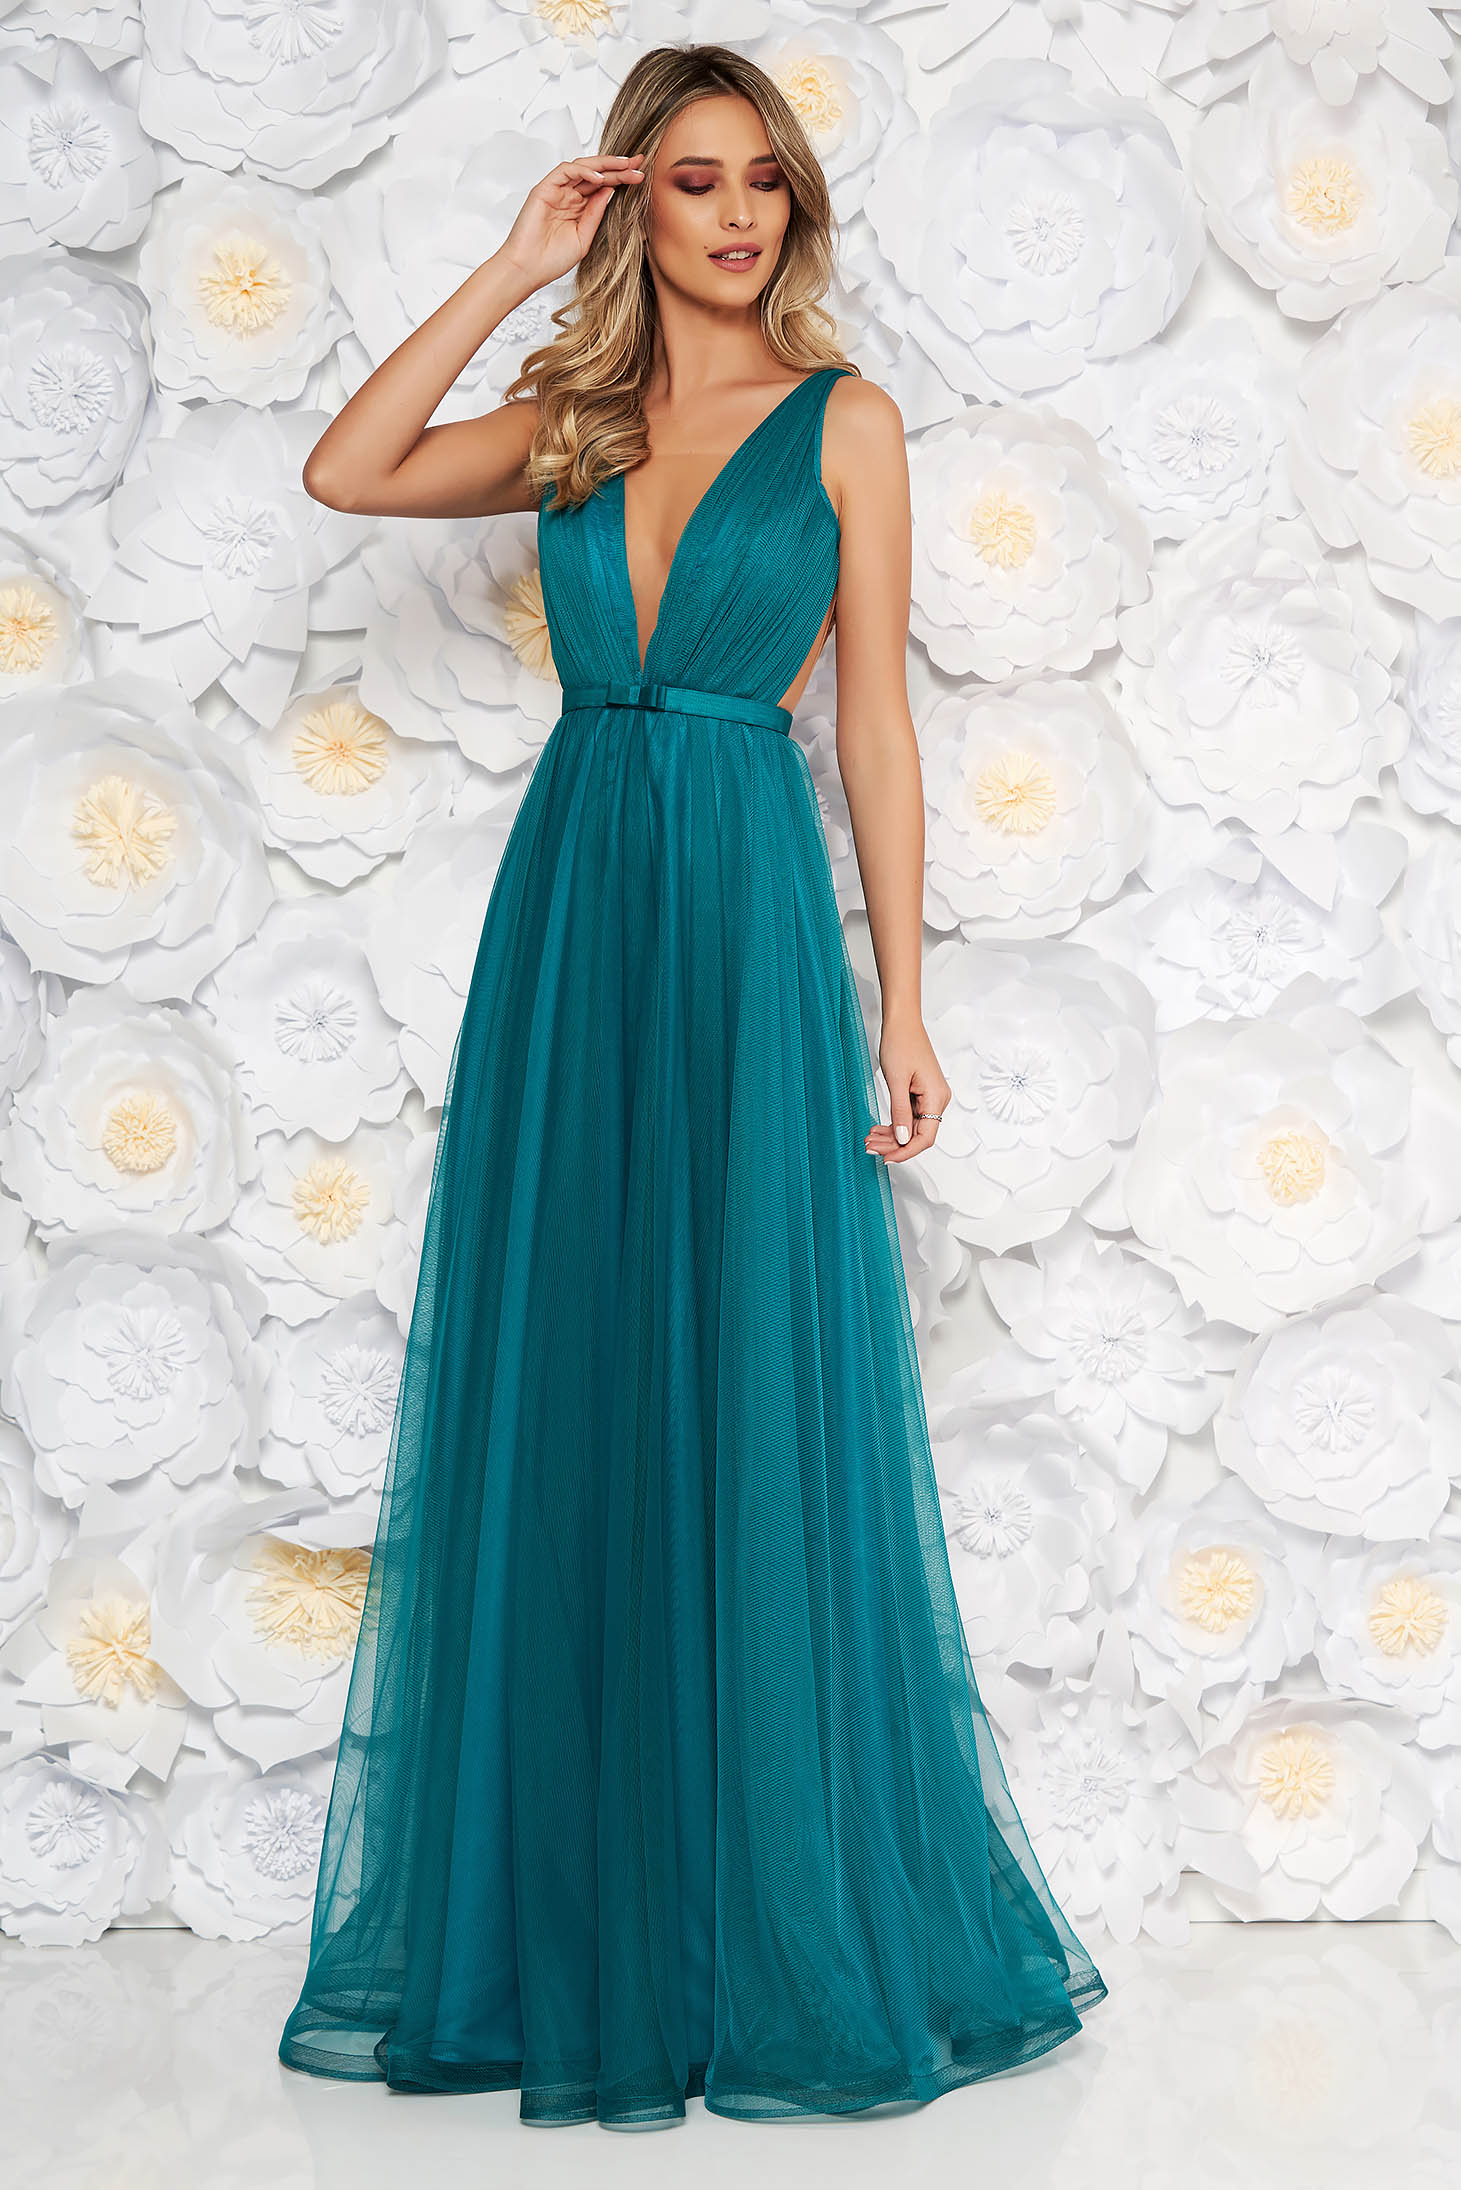 Ana Radu turquoise dress accessorized with tied waistband from tulle ...